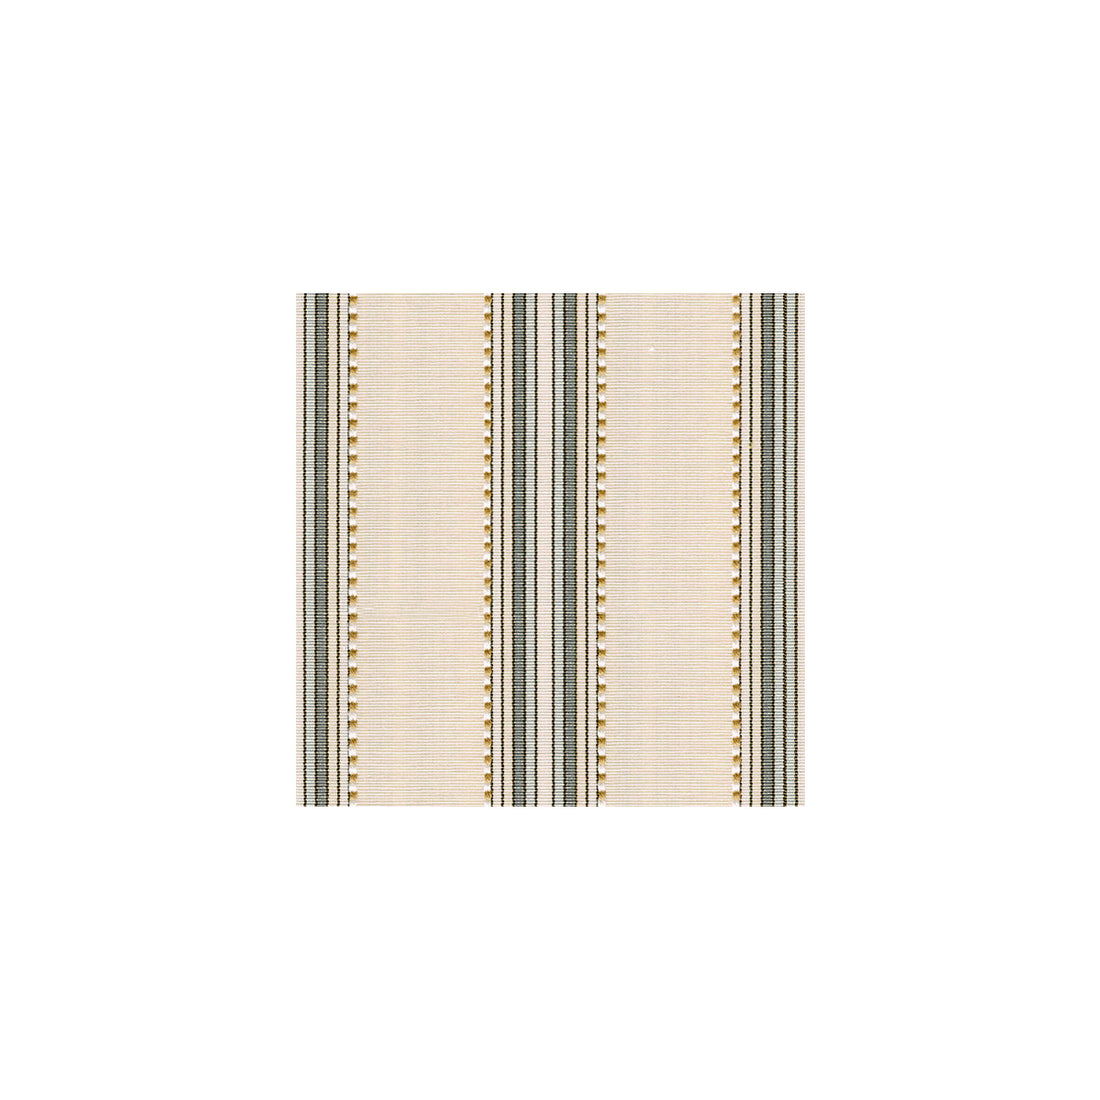 Sarala fabric in stone/oatmeal color - pattern PF50317.140.0 - by Baker Lifestyle in the The Echo Design collection